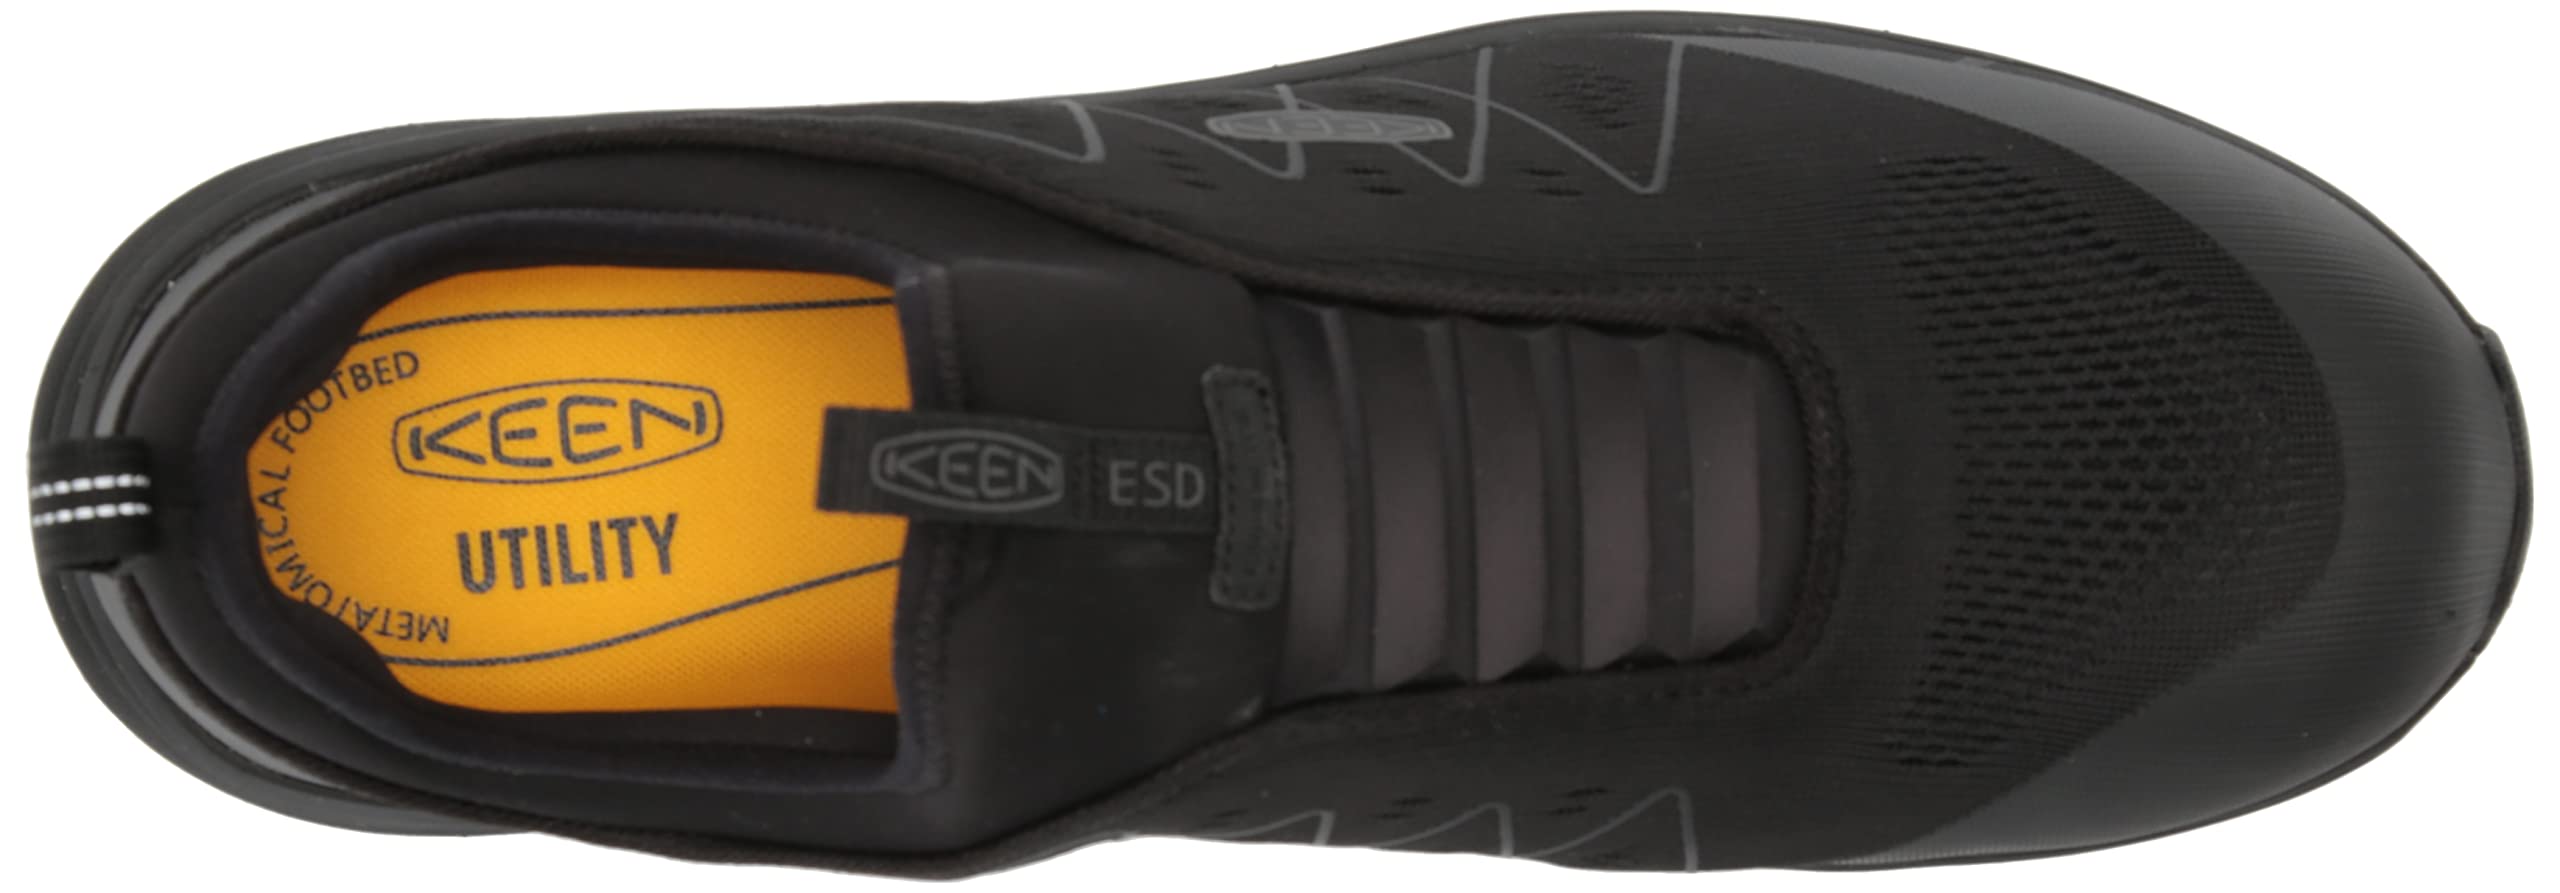 KEEN Utility Men's Vista Energy Shift Low Height Composite Toe ESD Slip on Industrial Work Shoes